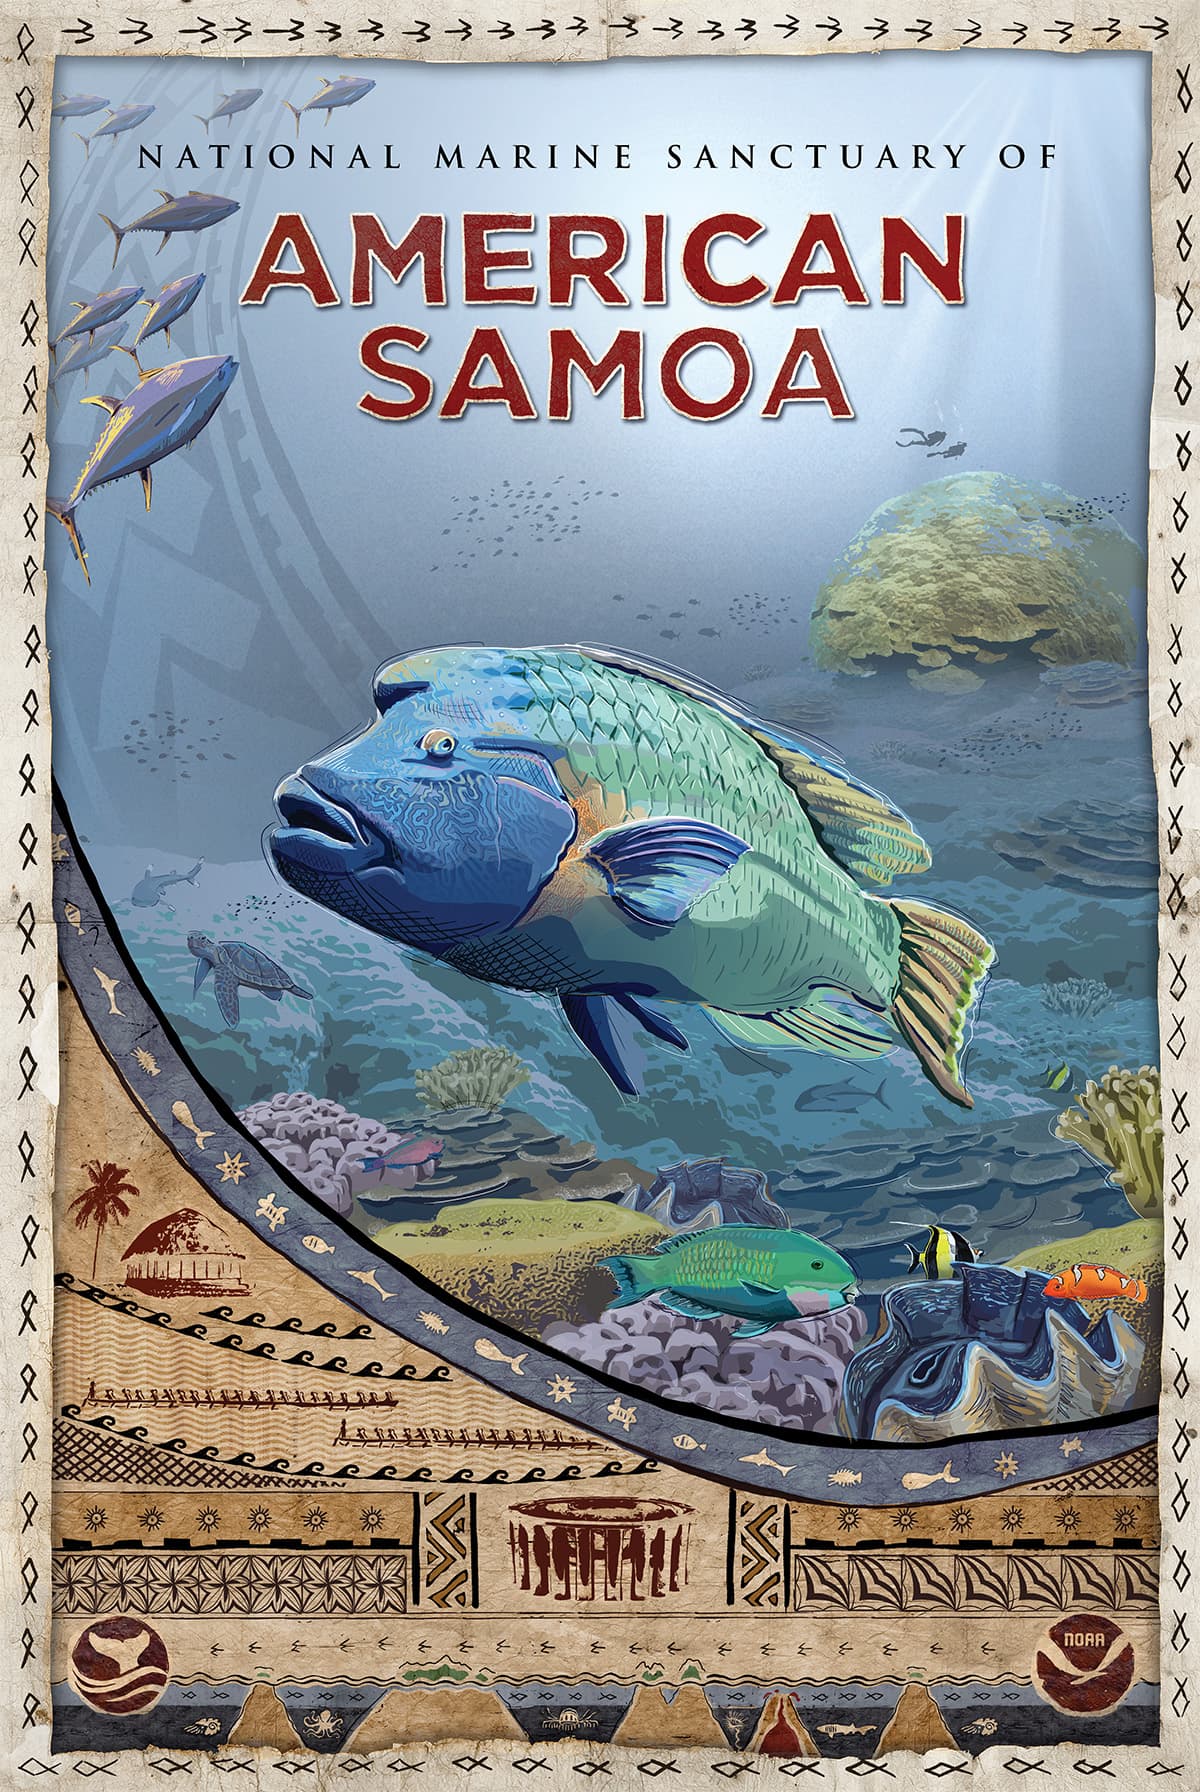 Samoan culture, customs, and language underpin a traditional way of life and stewardship of marine resources. The poster features an ava bowl used for ceremonial practices, a Samoan fale (house) found in villages, and fautasi or long boat canoe. Underwater, tropical coral gardens teem with marine life, including iconic humphead wrasses, endangered hawksbill sea turtles, giant clams, massive Porites corals, and colorful parrotfish, while an oceanic whitetip shark and yellowfin tuna swim near the reef edge.